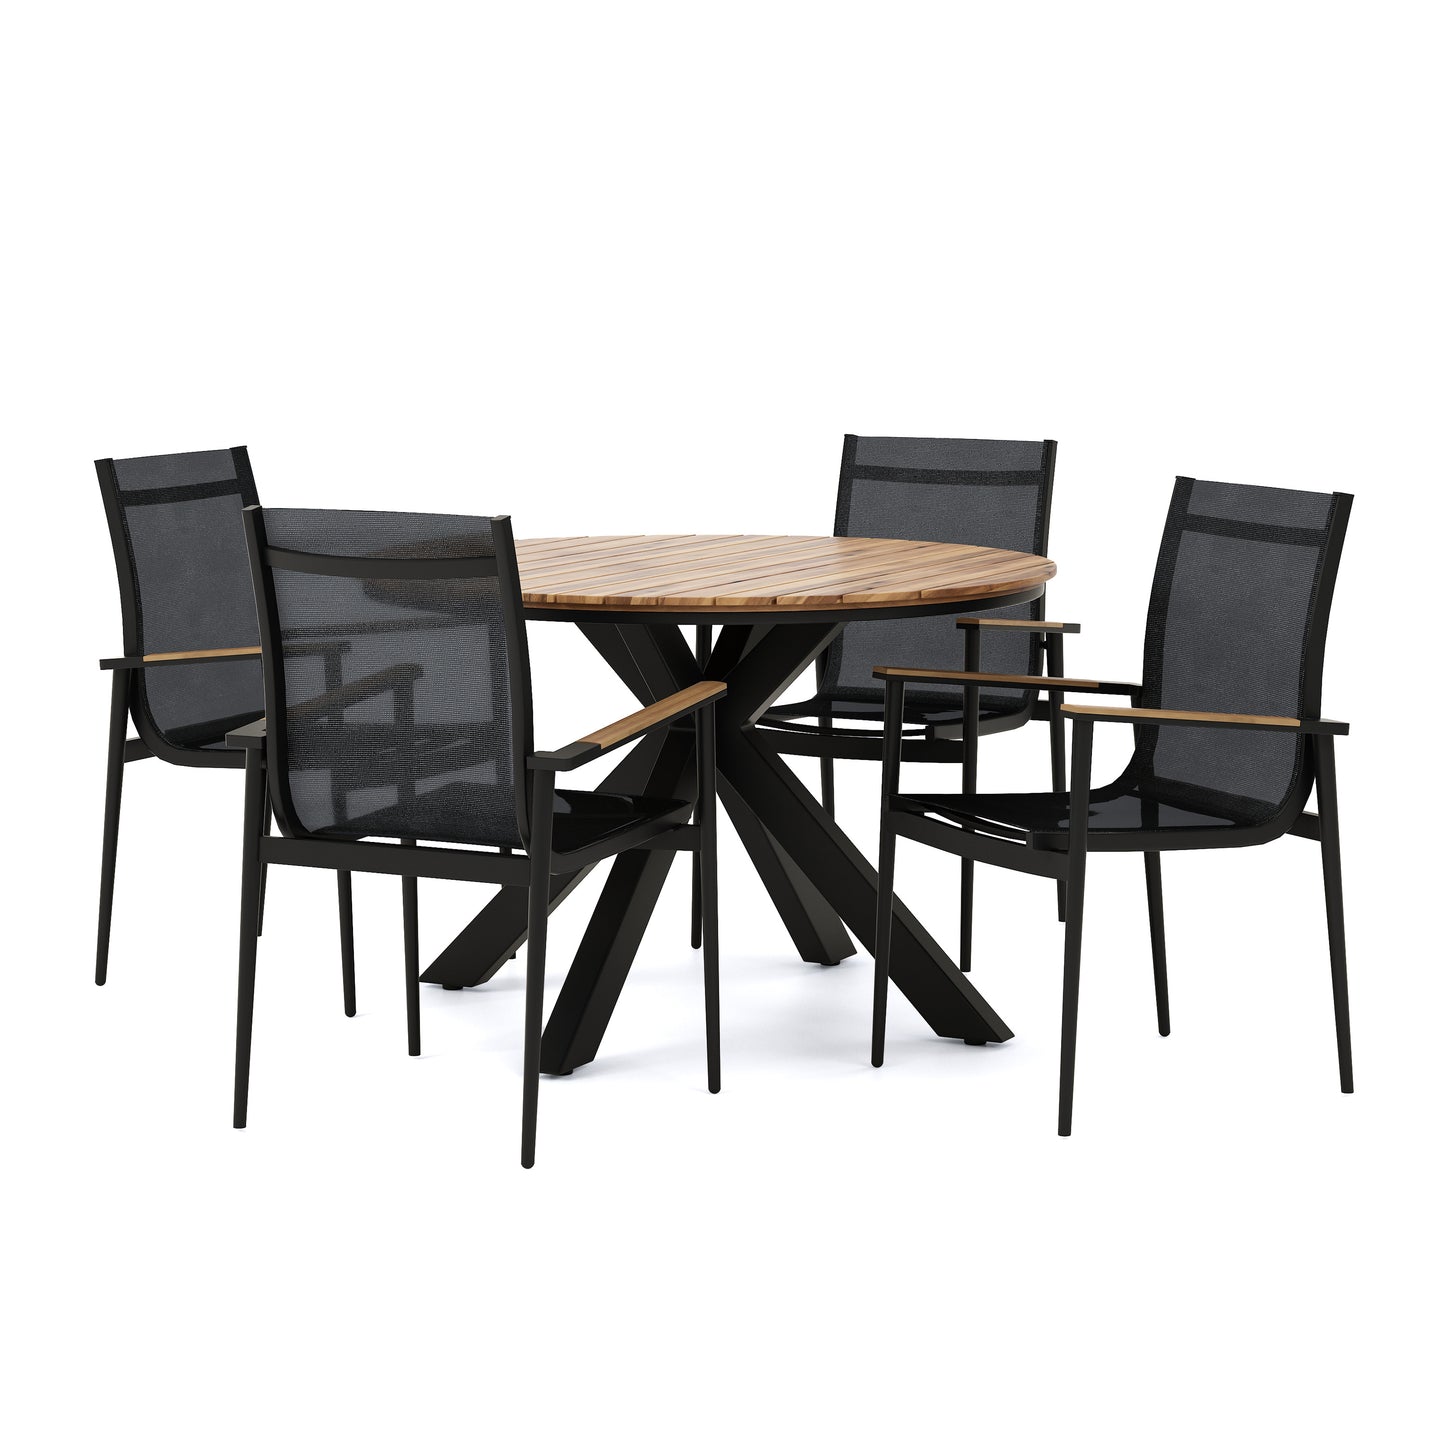 Norcrest Outdoor Mesh and Acacia Wood 5 Piece Dining Set, Black and Teak